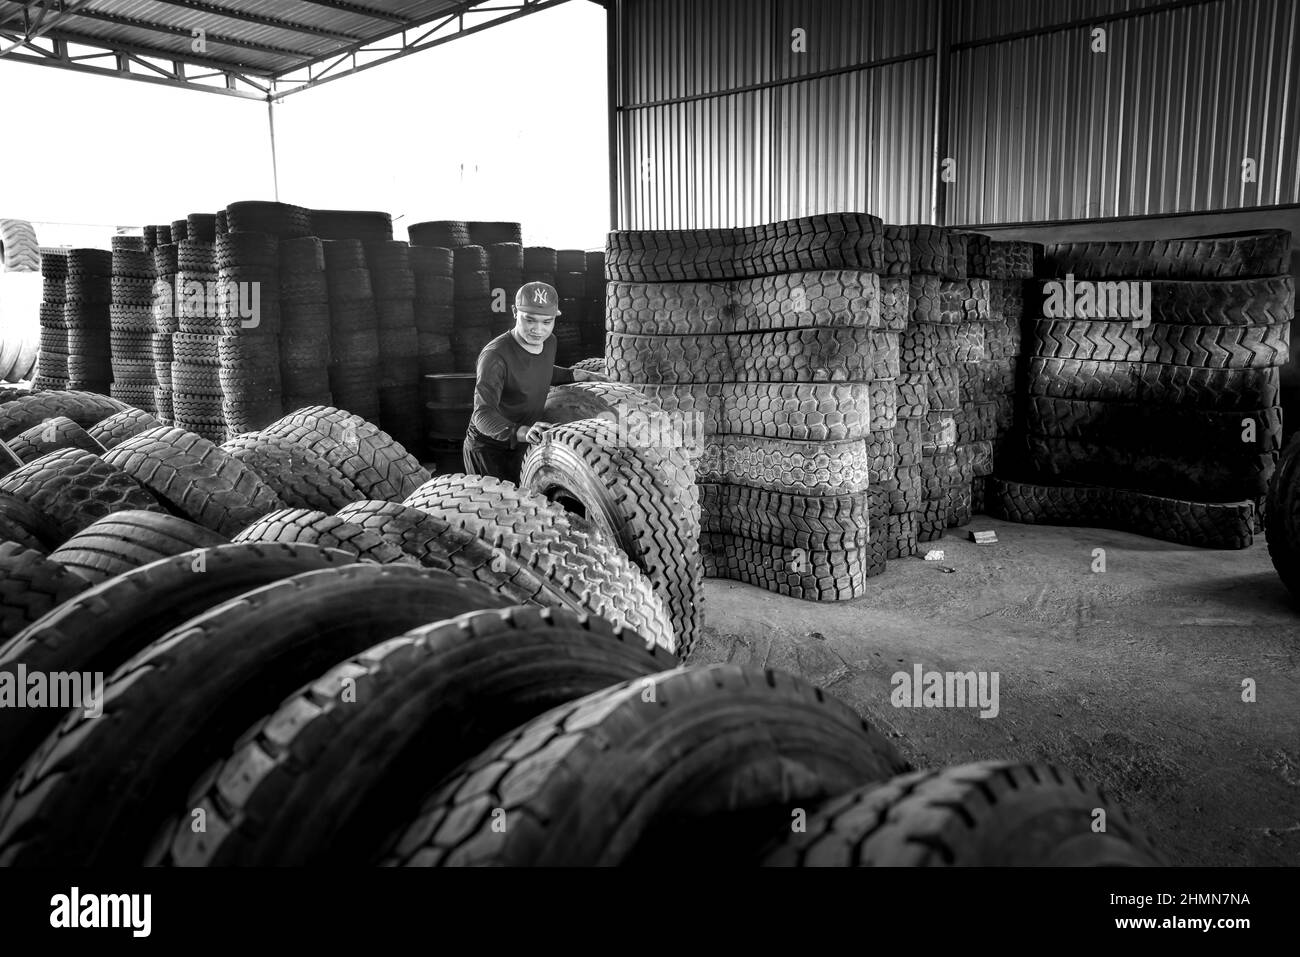 Son Tinh, Quang Ngai, Vietnam - December 31, 2021: workers work at an old car tire recycling factory in Son Tinh district, Quang Ngai province, Vietna Stock Photo